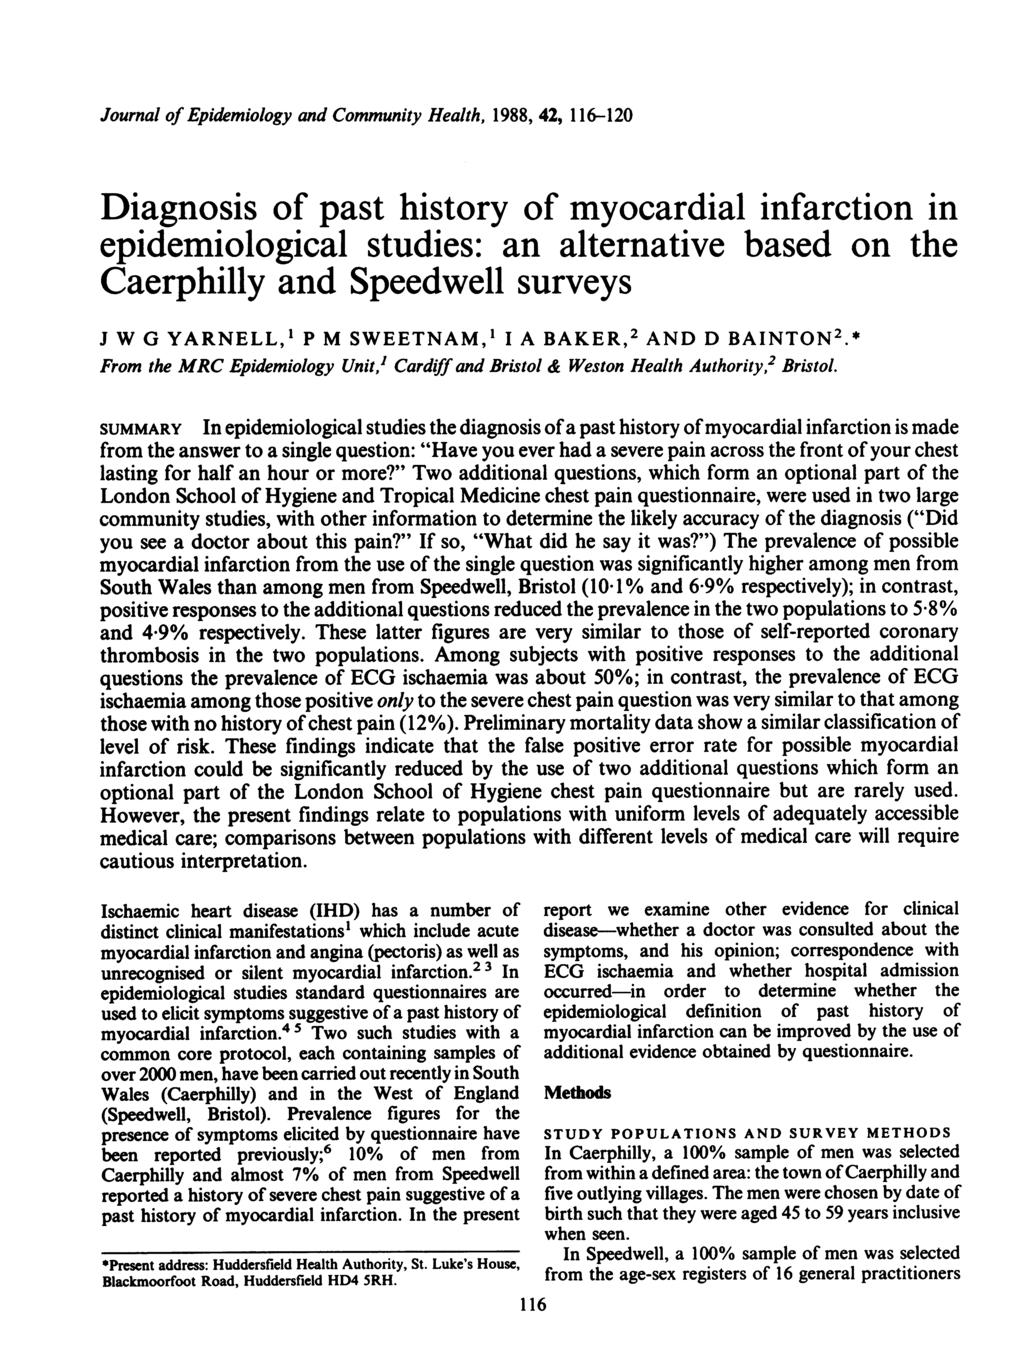 Journal of Epidemiology and Community Health, 1988, 42, 116-120 Diagnosis of past history of myocardial infarction in epidemiological studies: an alternative based on the and surveys A BAKER,2 AND D